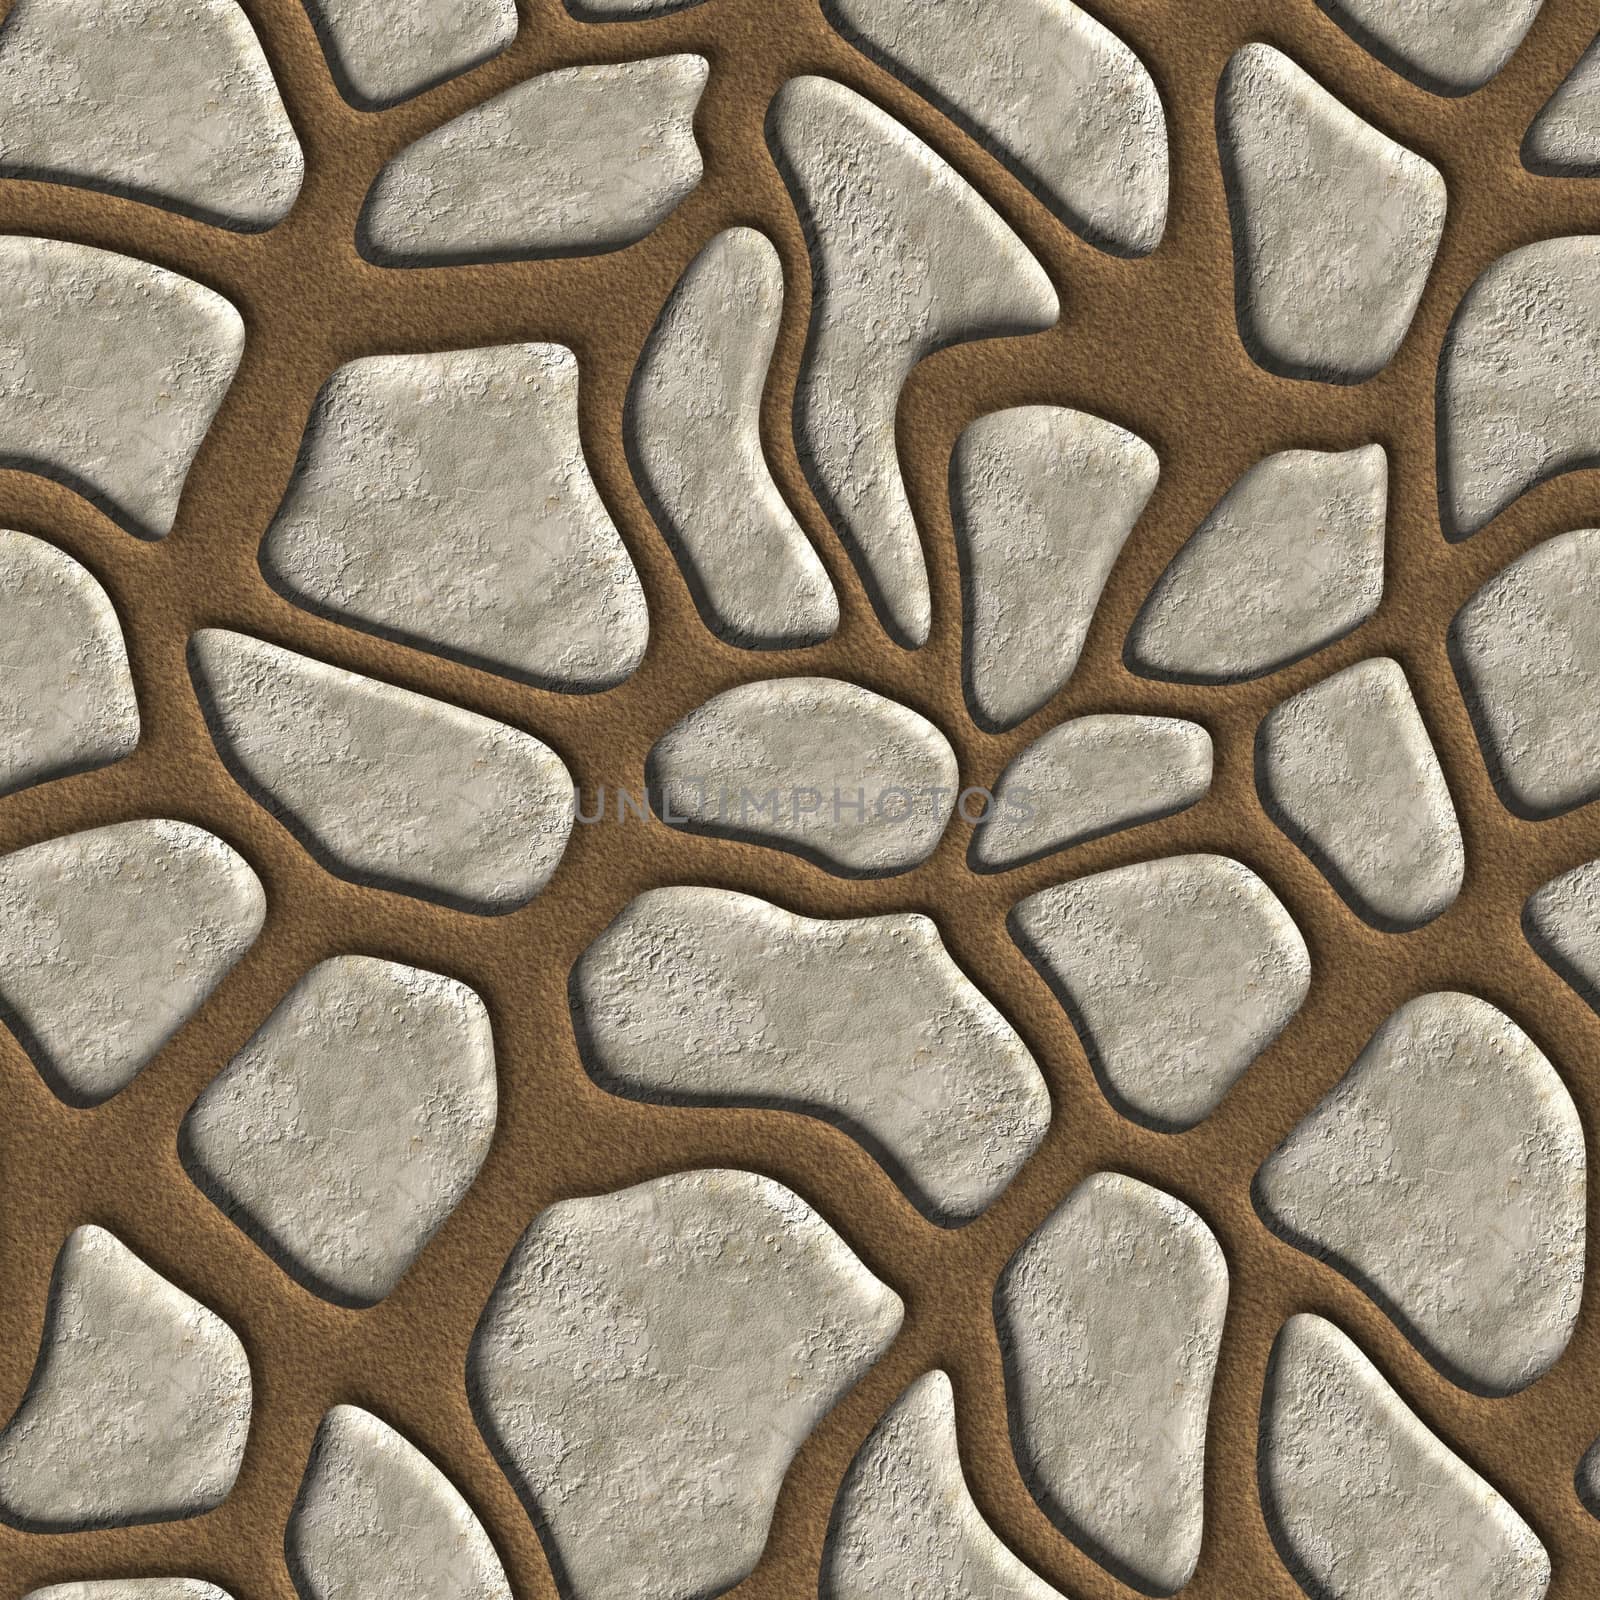 Distorted rock seamless tileable decorative background pattern